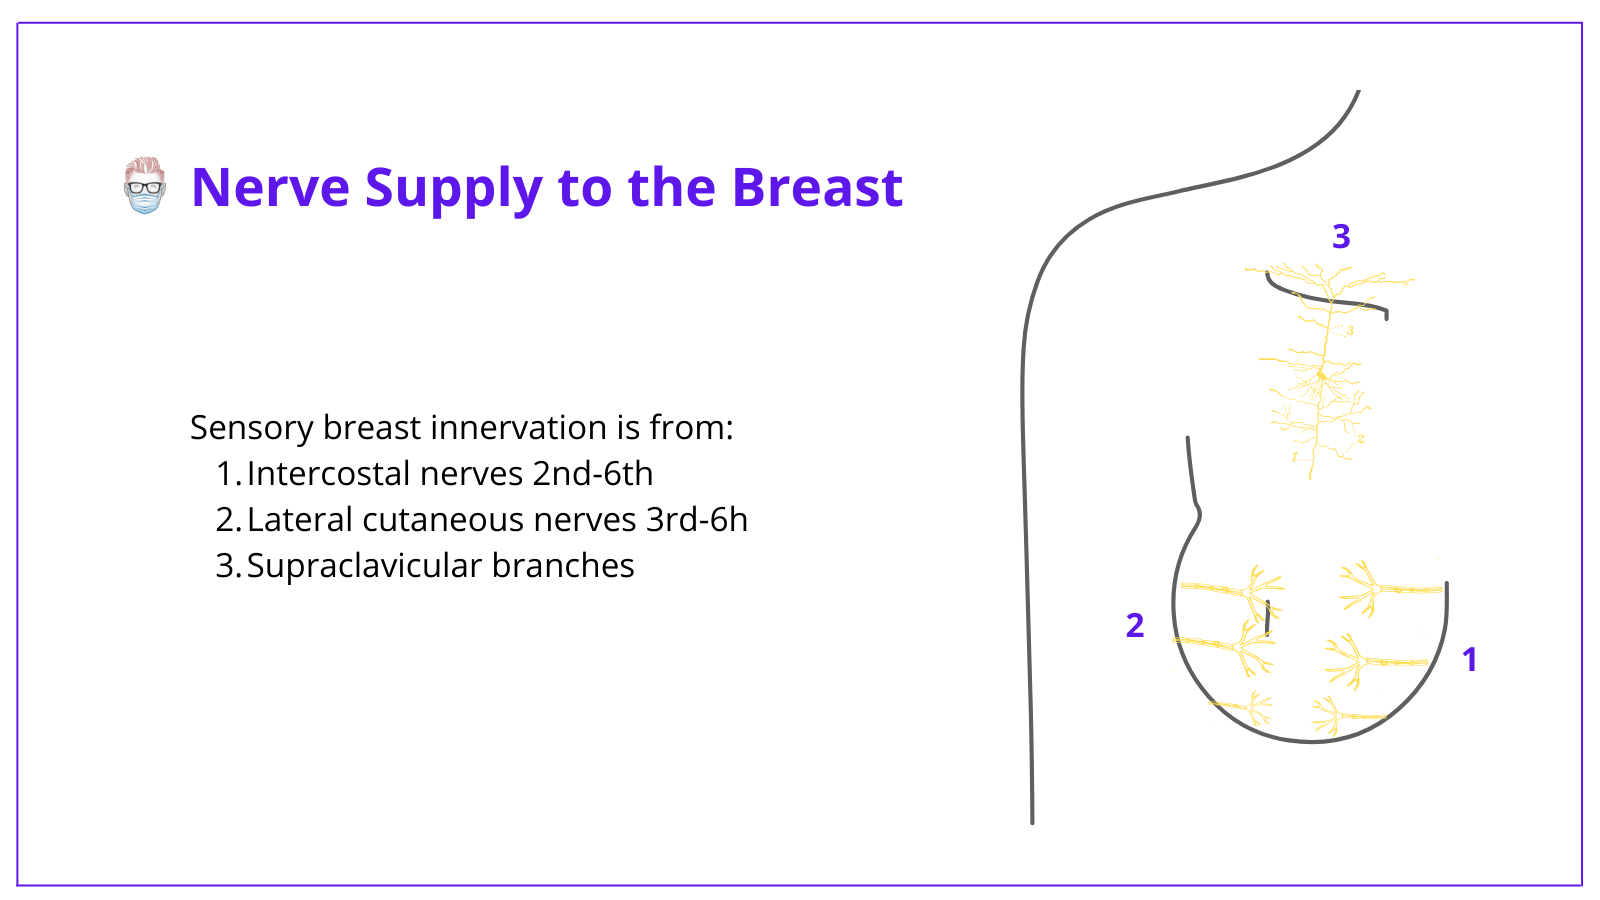 The breast anatomy recieves sensory nerve innervation from the intercostal nerves, lateral cutaenous nerves and the supraclavicular branches of the cervical plexus.